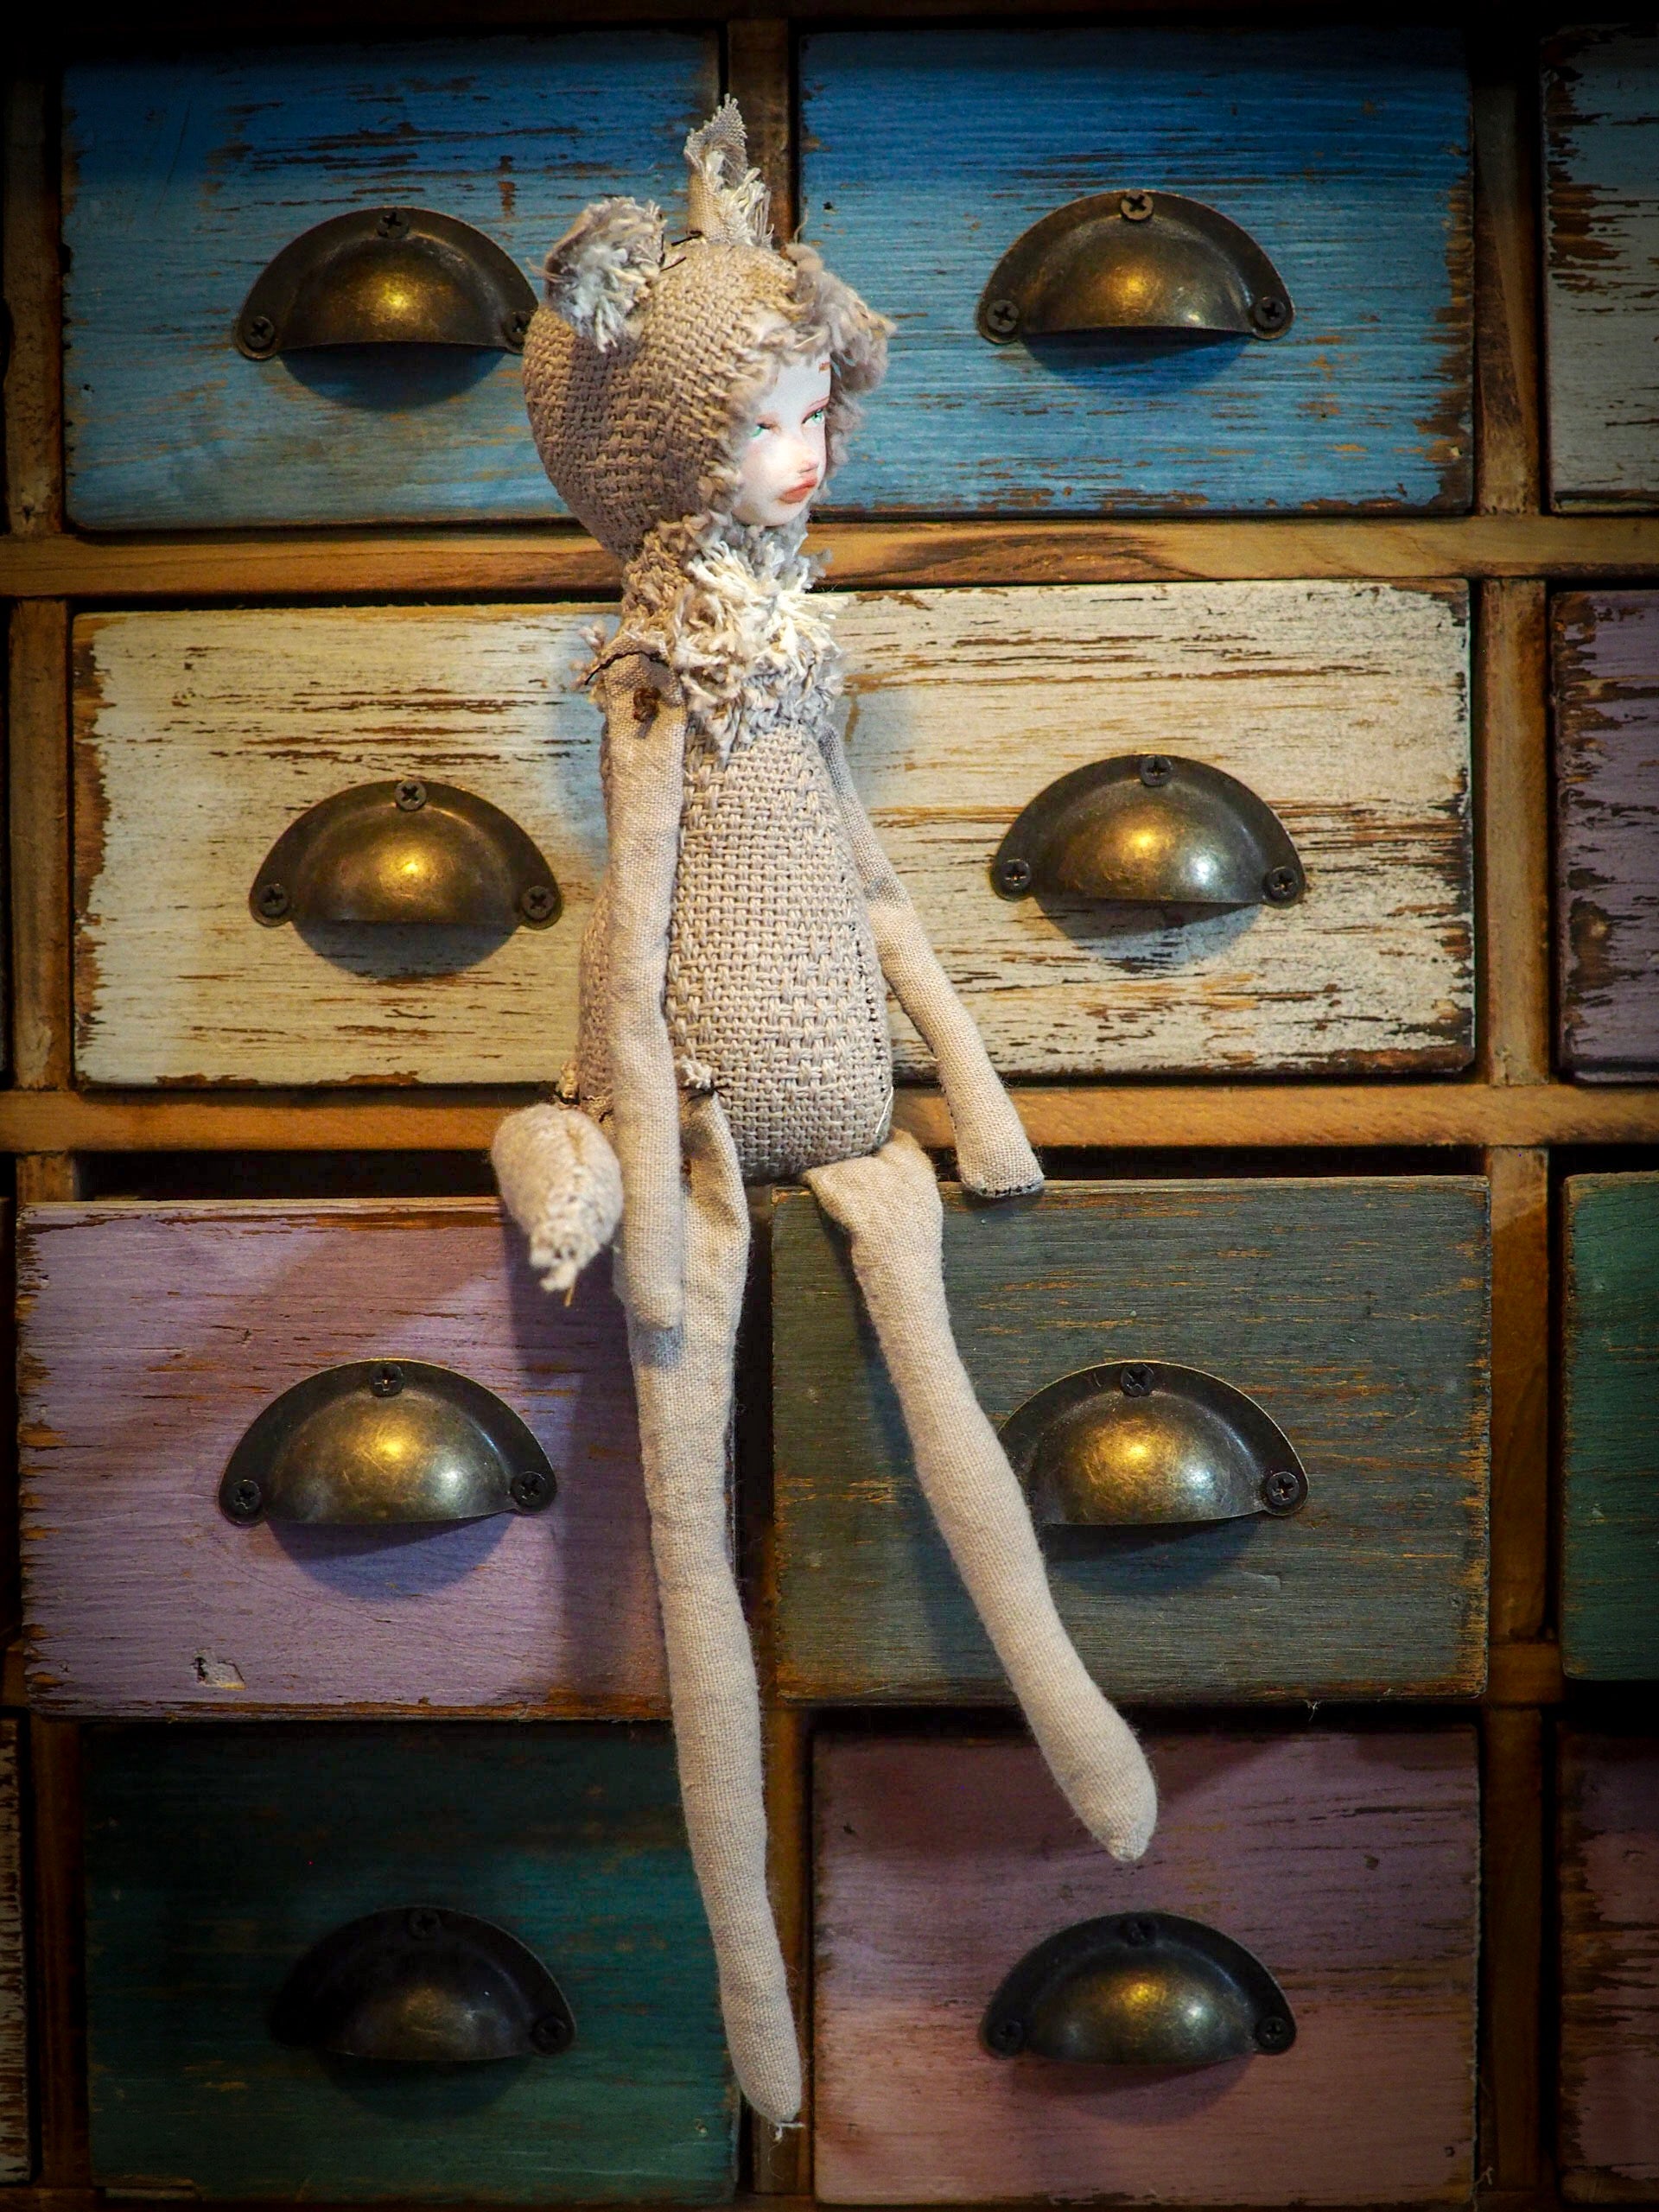 THE WOLF - An original handmade doll by Danita Art, made with original patterns, organic fabric dyed using only natural ingredients like avocado peels, walnuts and marigolds. Each mini art doll in this toy collection is a mini work of huggable fabric art to be treasured by any collector of Danita's melancholic and fantastic work.